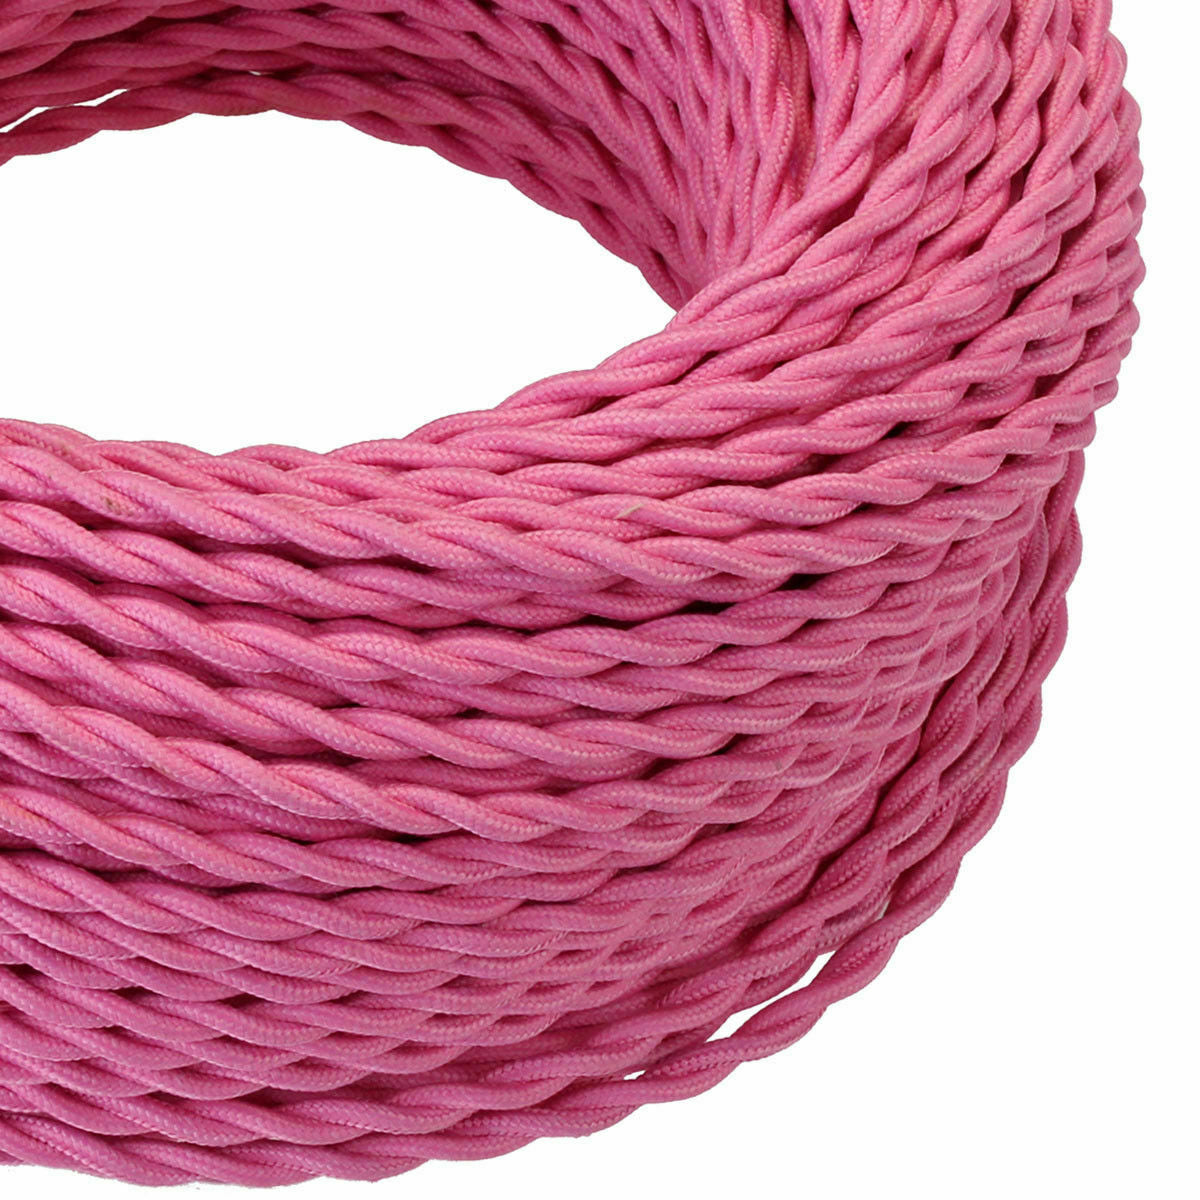 Light Pink Twisted Cable.JPG